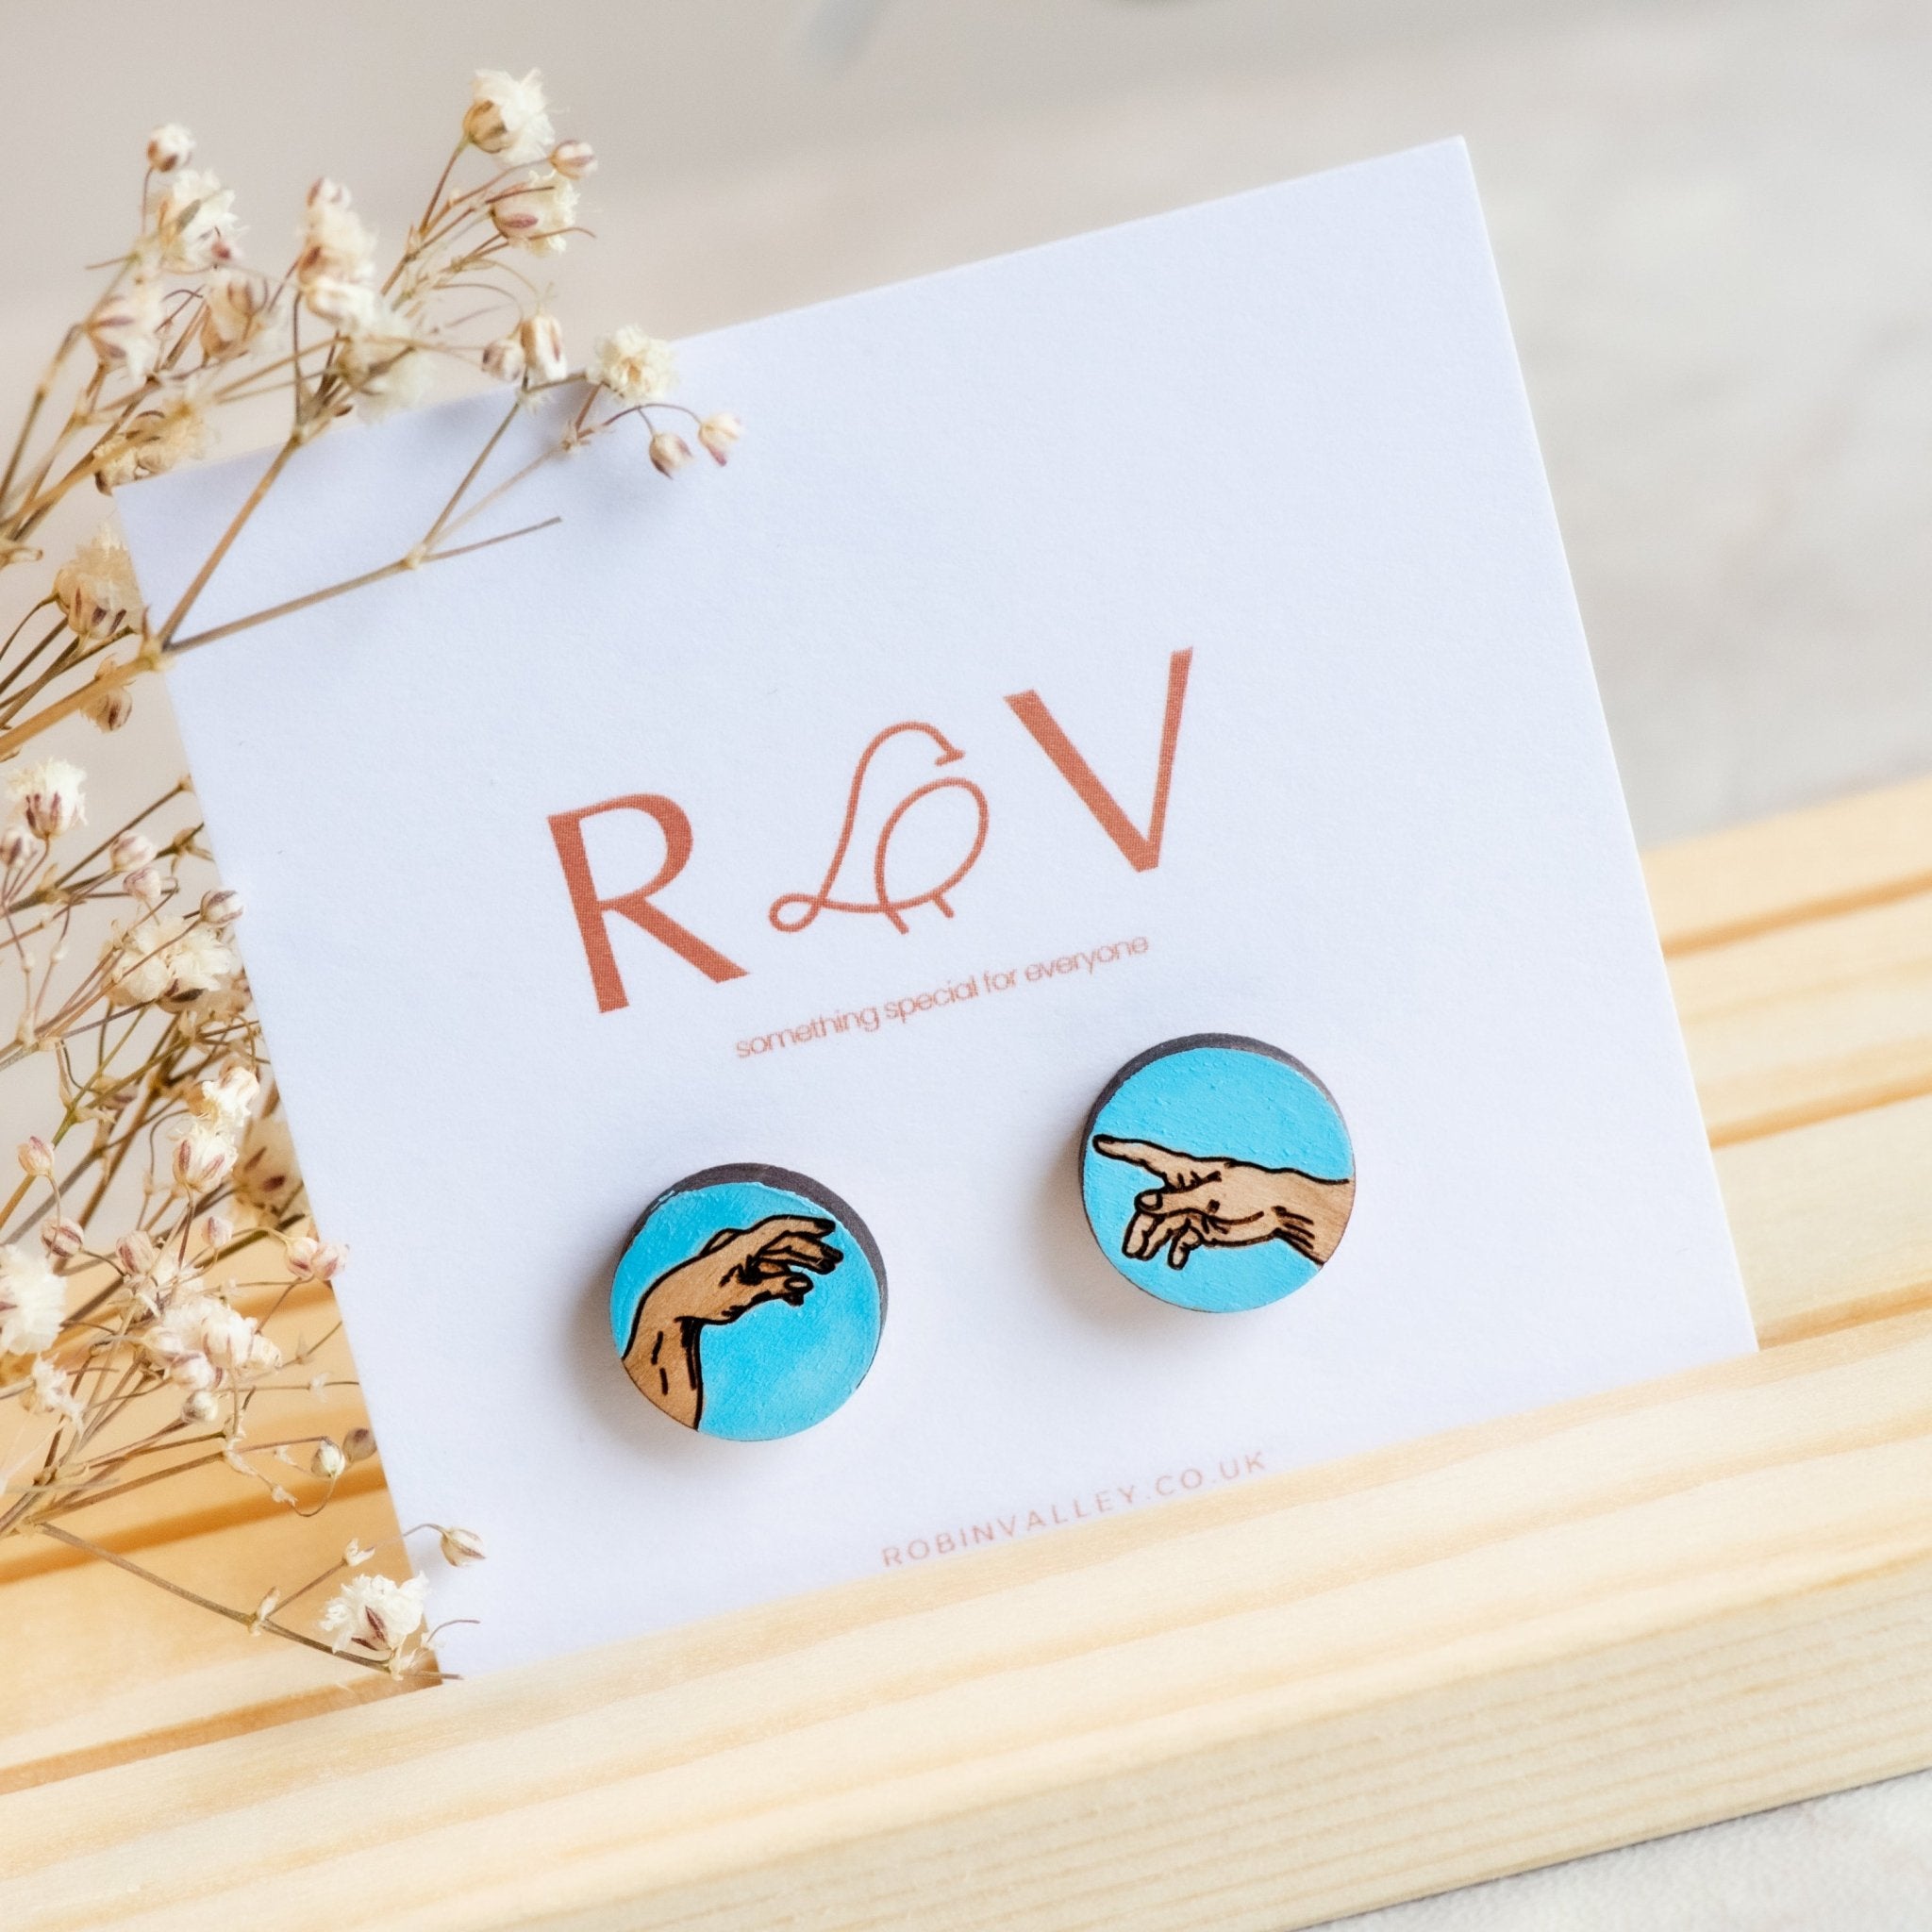 Hand-painted Hands of God Earrings inspired by Michelangelo Buonarotti Eco-Jewellery - PEO14068 - Robin Valley Official Store